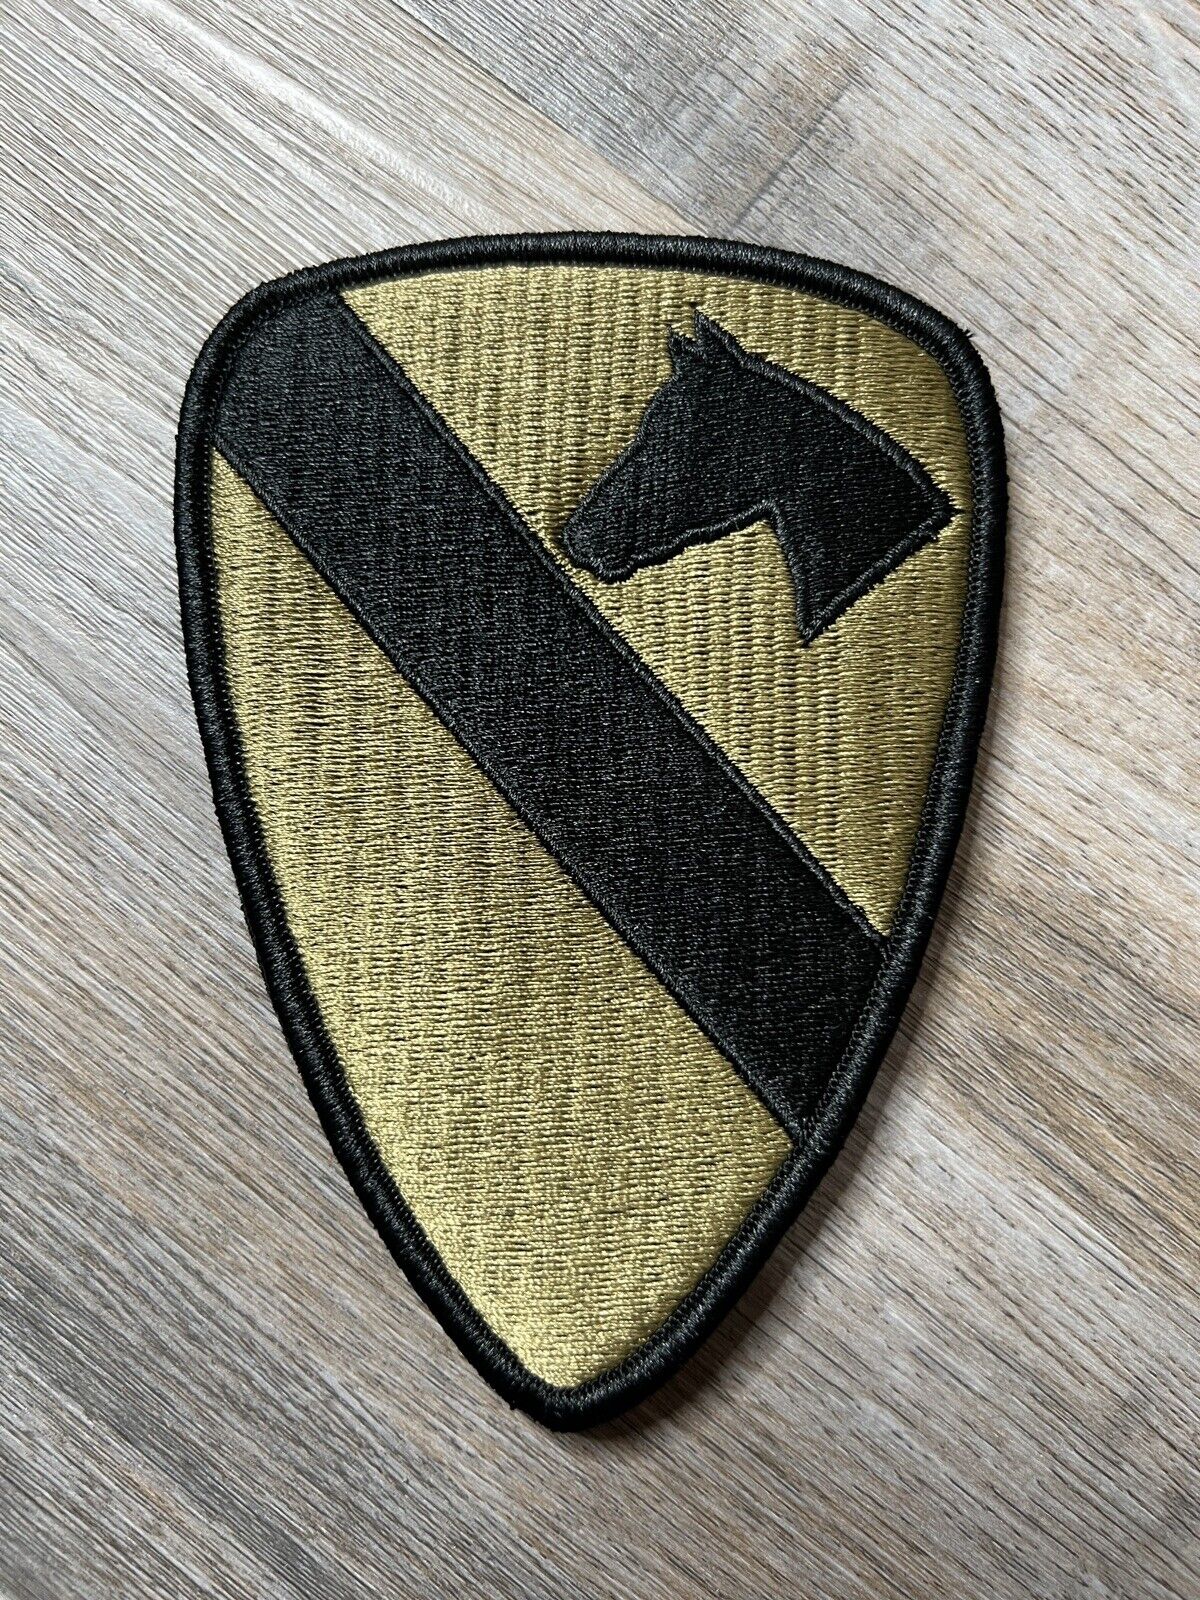 1st Cavalry Division Subdued U.S. Army Shoulder Patch Insignia